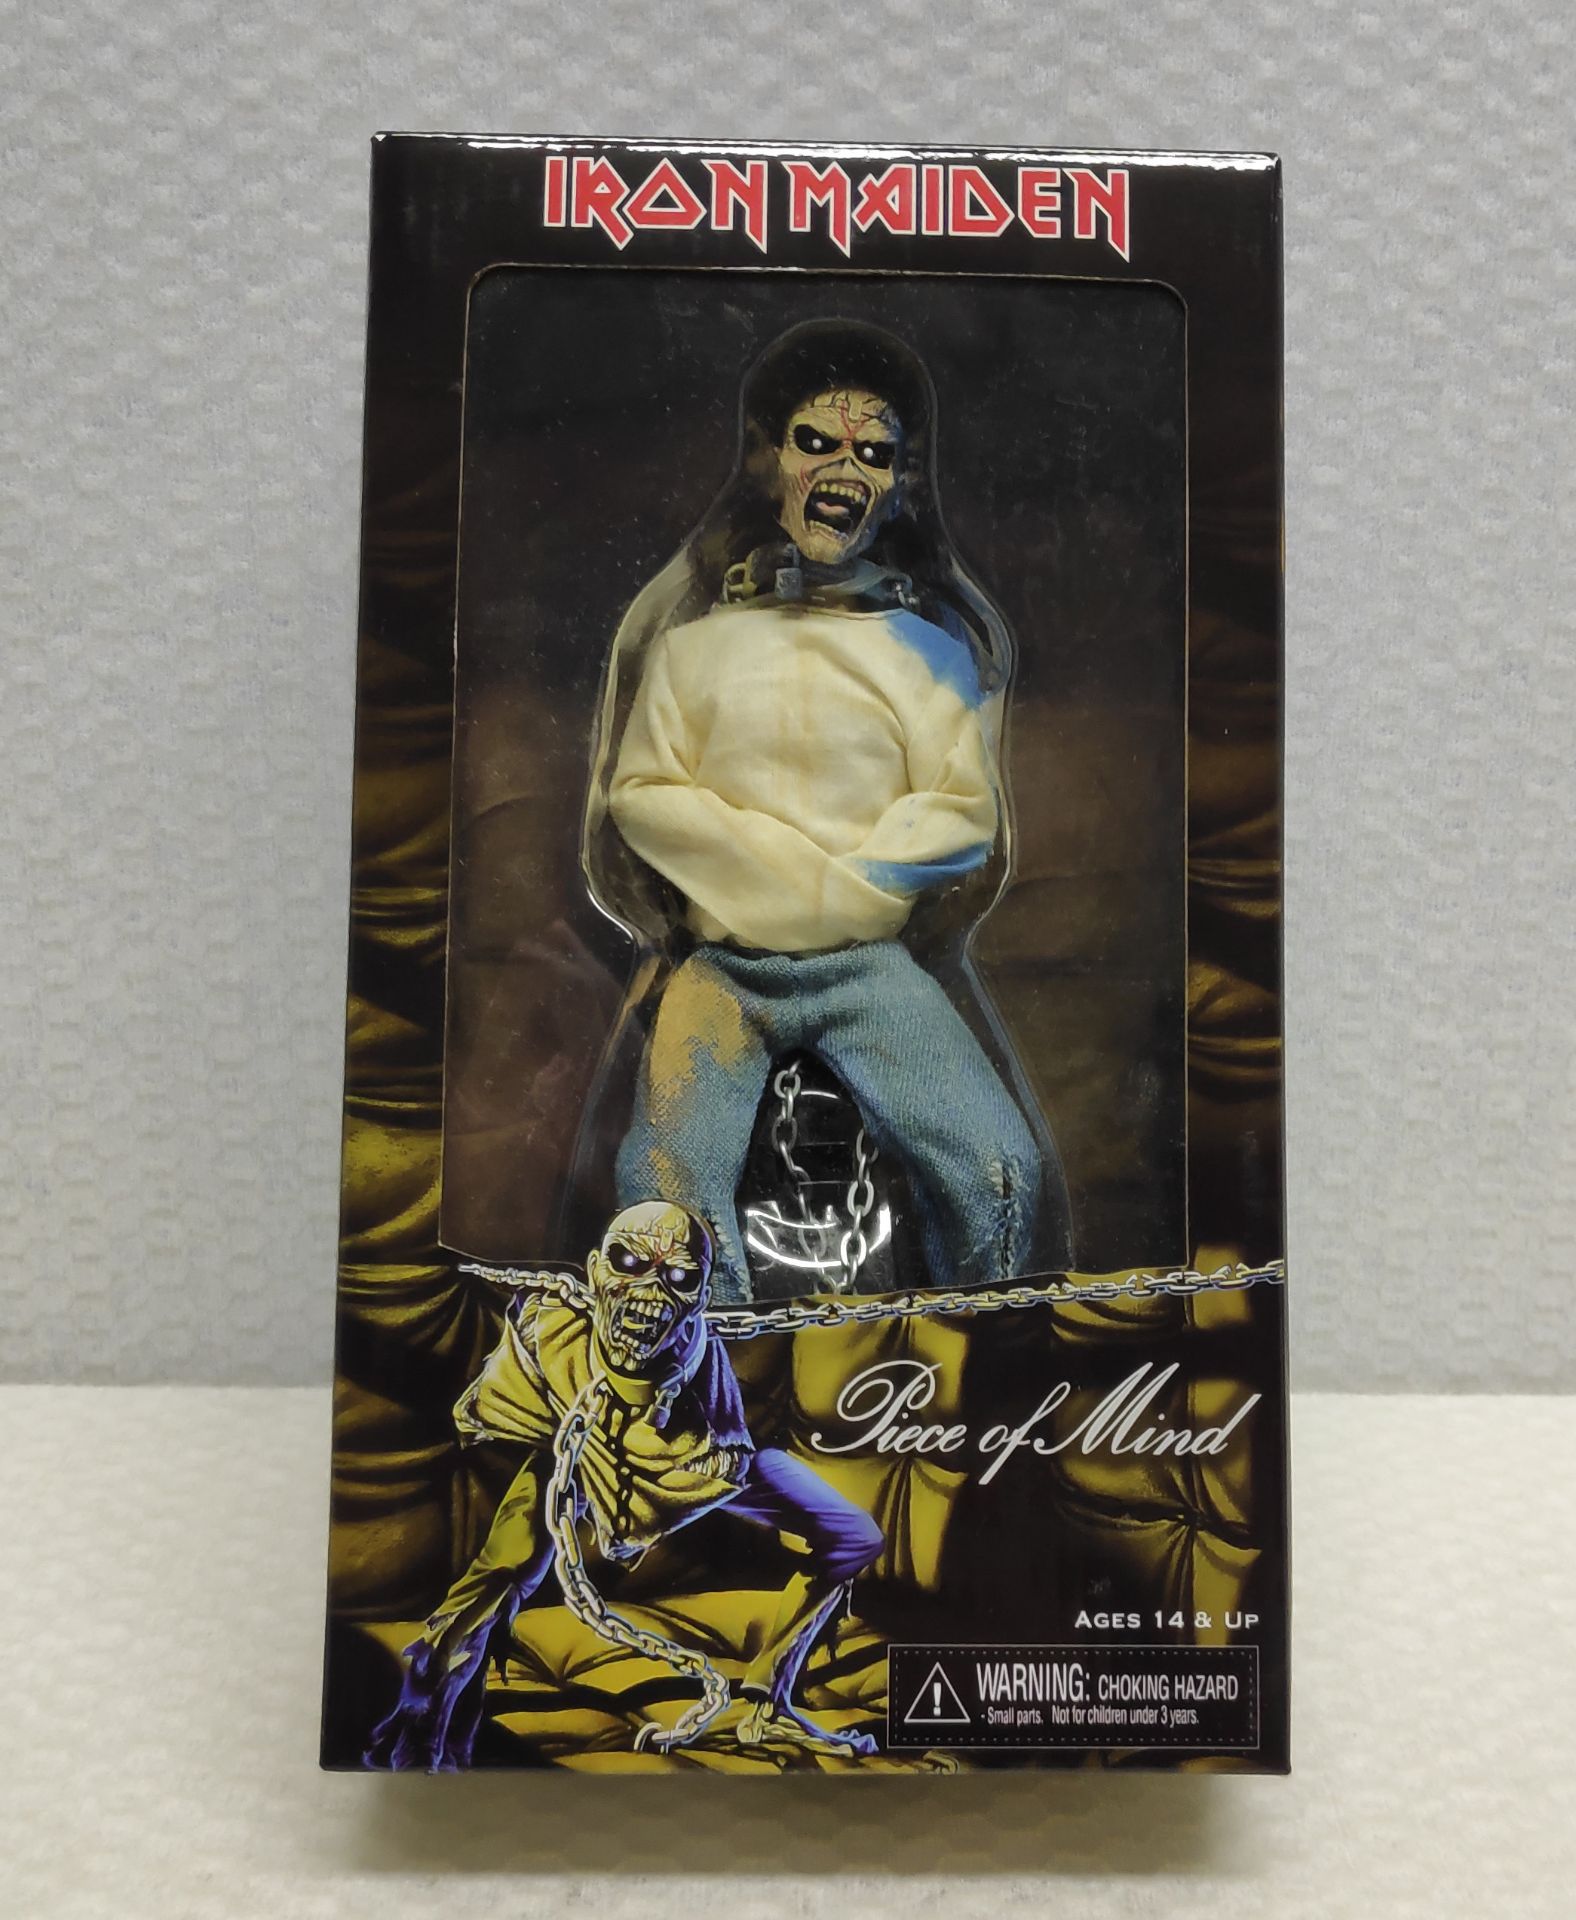 1 x Iron Maiden Eddie Piece of Mind NECA Action Figure - New/Boxed - HTYS166 - CL720 - Location: Alt - Image 5 of 11